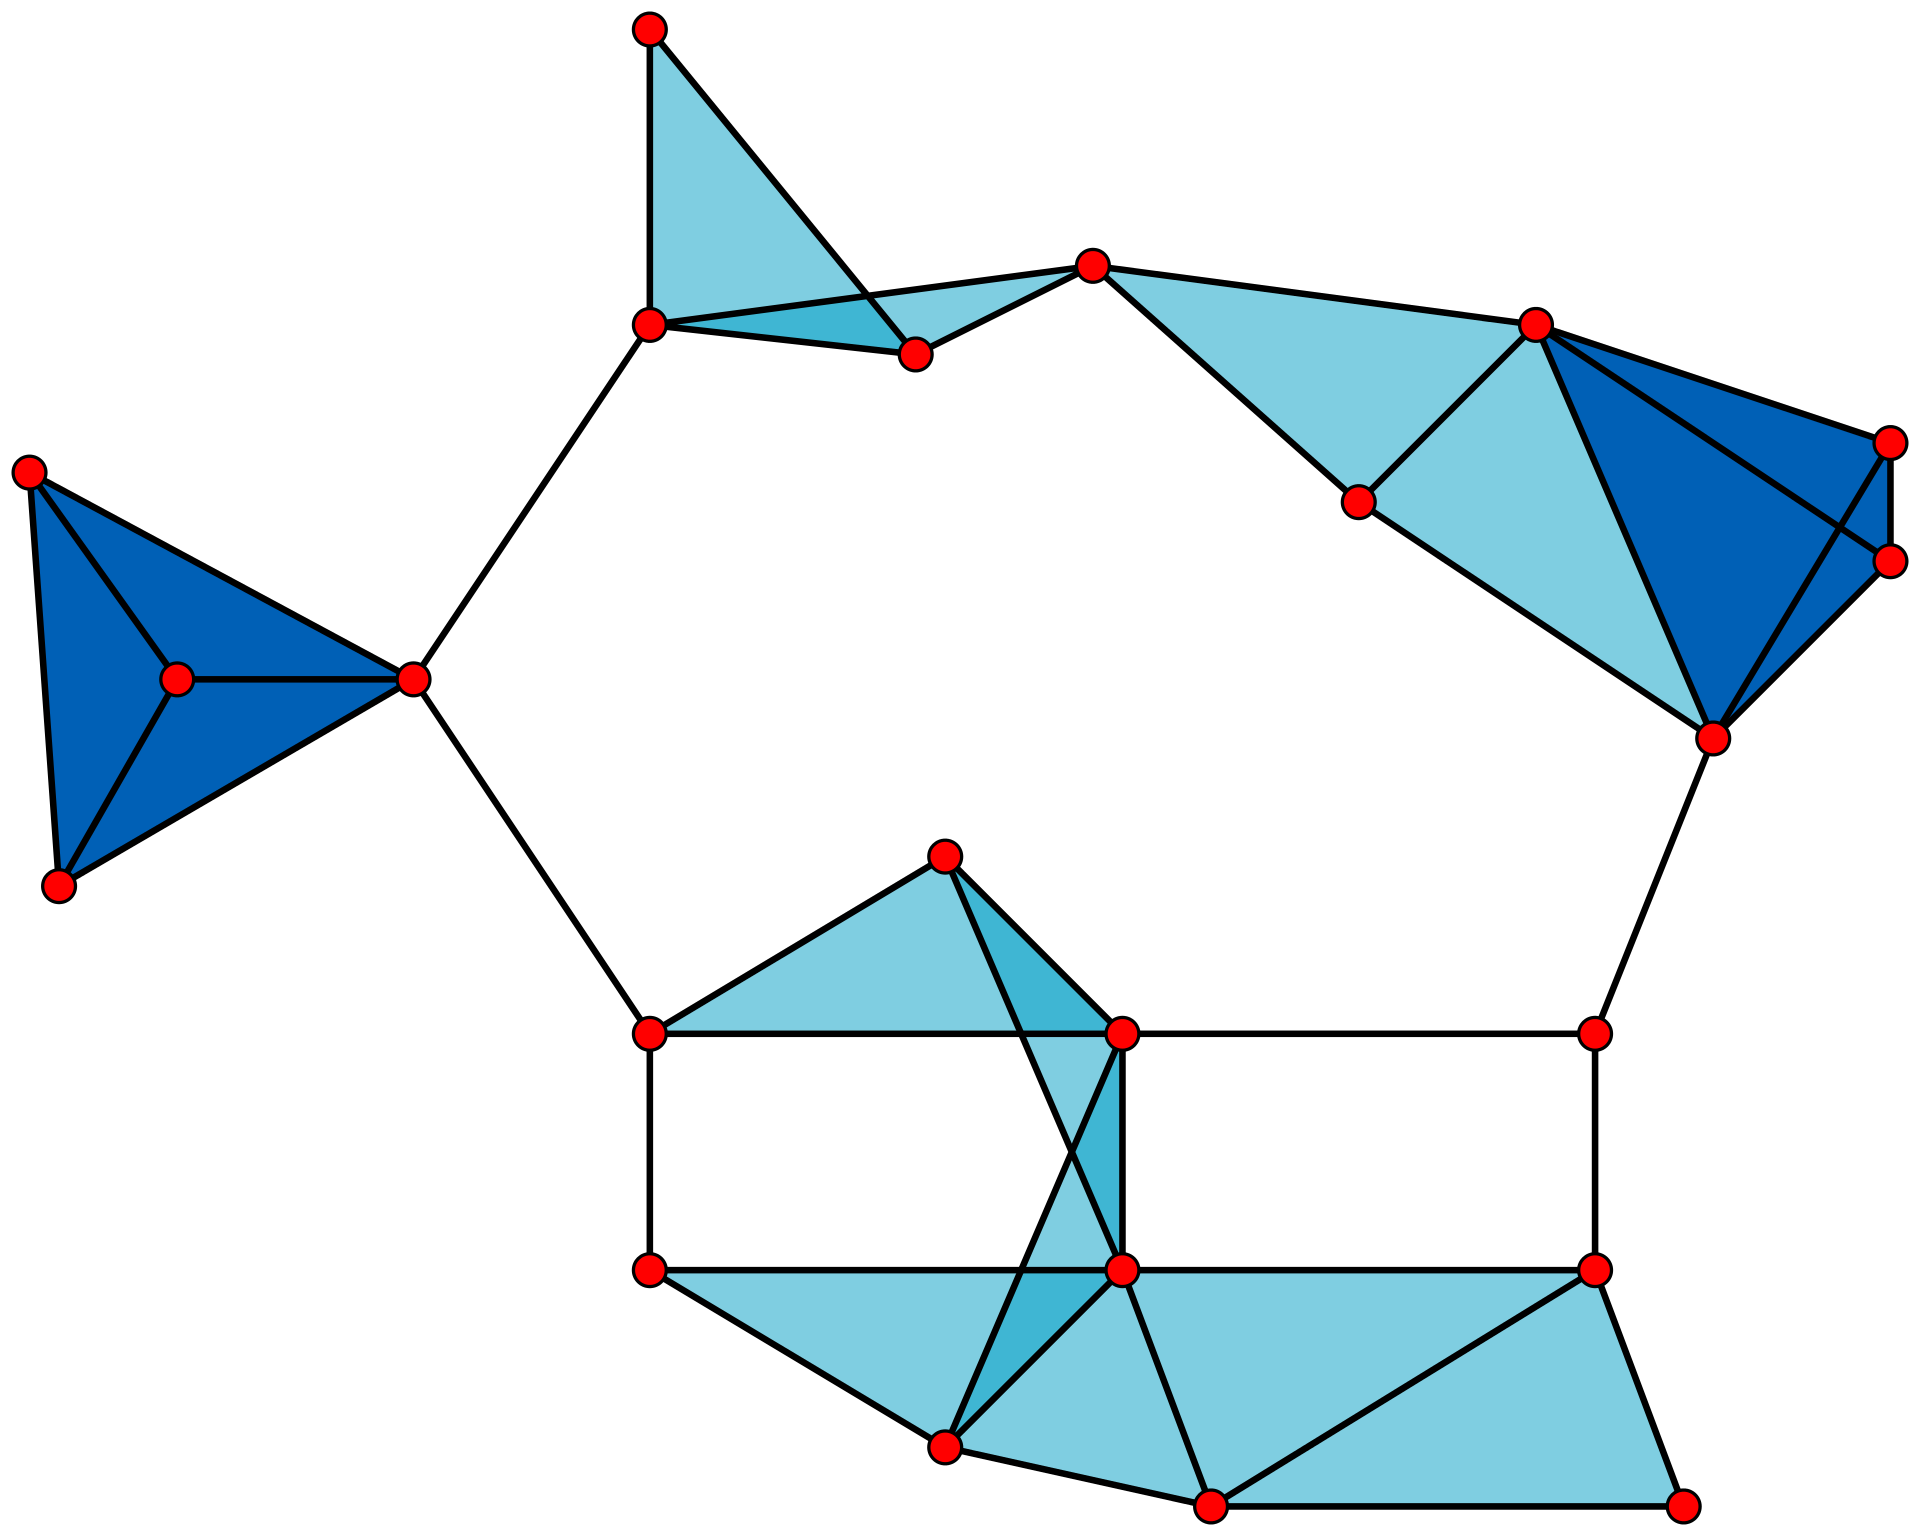 Cliques in a graph